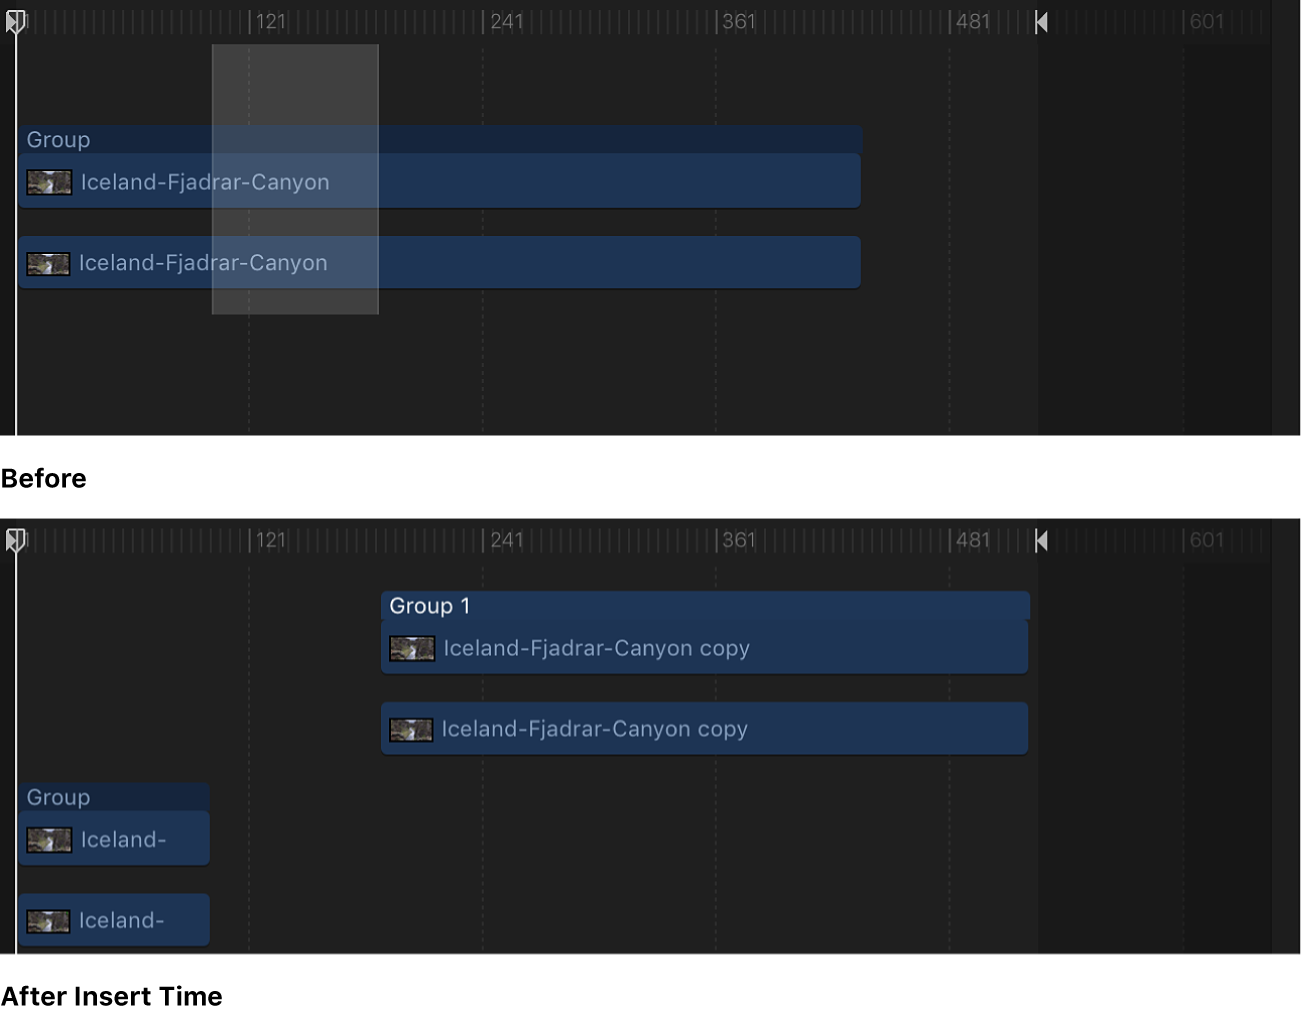 Timeline showing blank space being inserted into a sequence